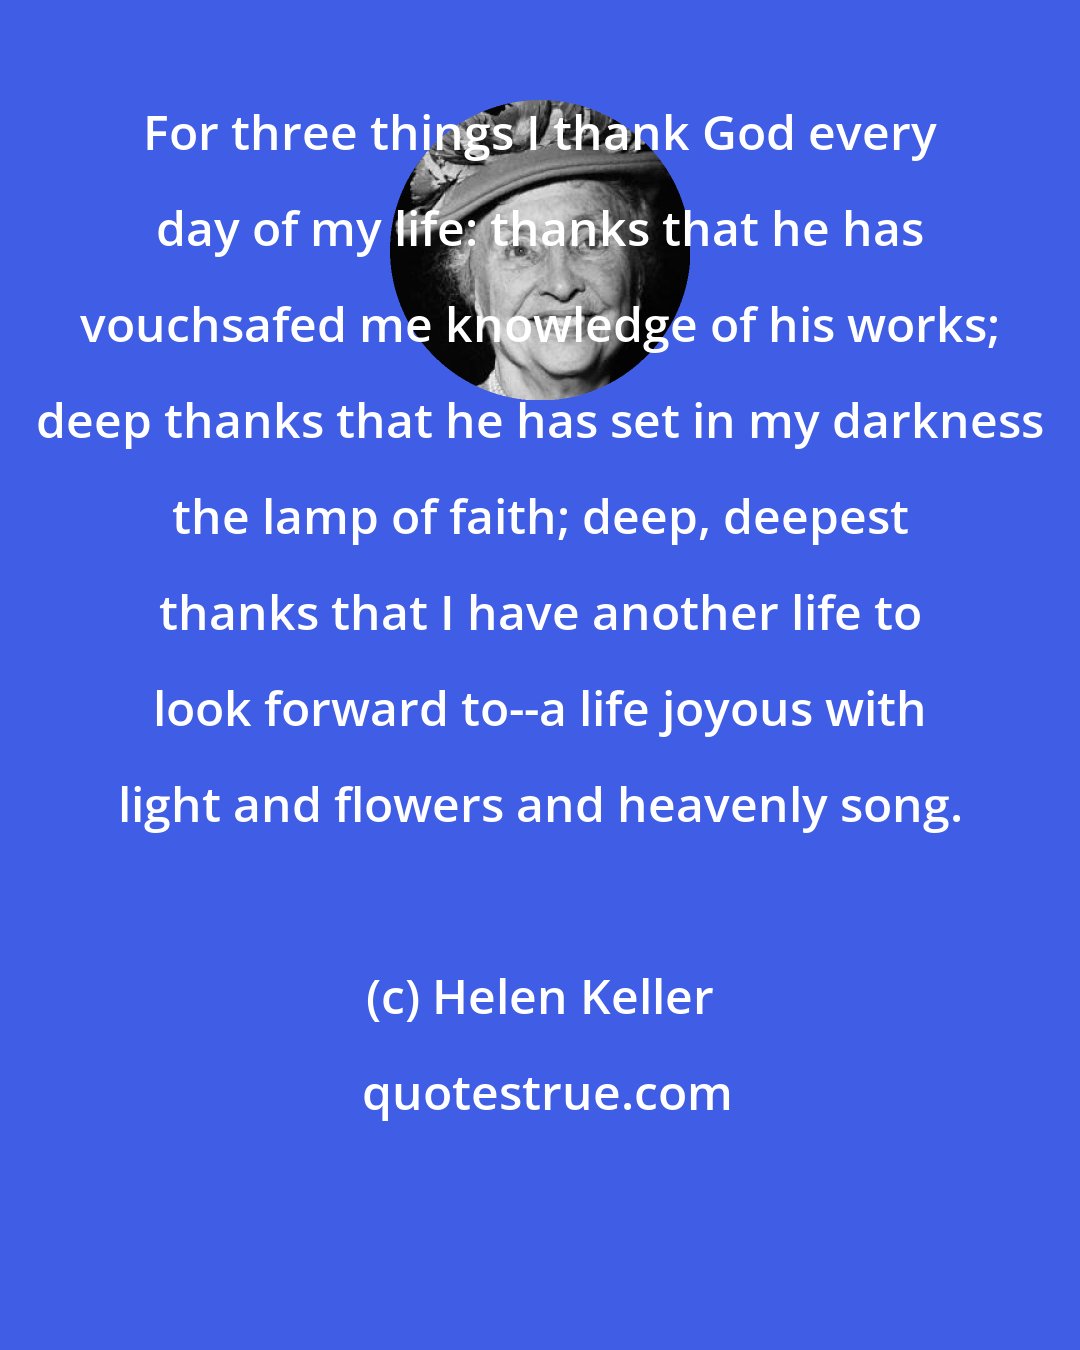 Helen Keller: For three things I thank God every day of my life: thanks that he has vouchsafed me knowledge of his works; deep thanks that he has set in my darkness the lamp of faith; deep, deepest thanks that I have another life to look forward to--a life joyous with light and flowers and heavenly song.